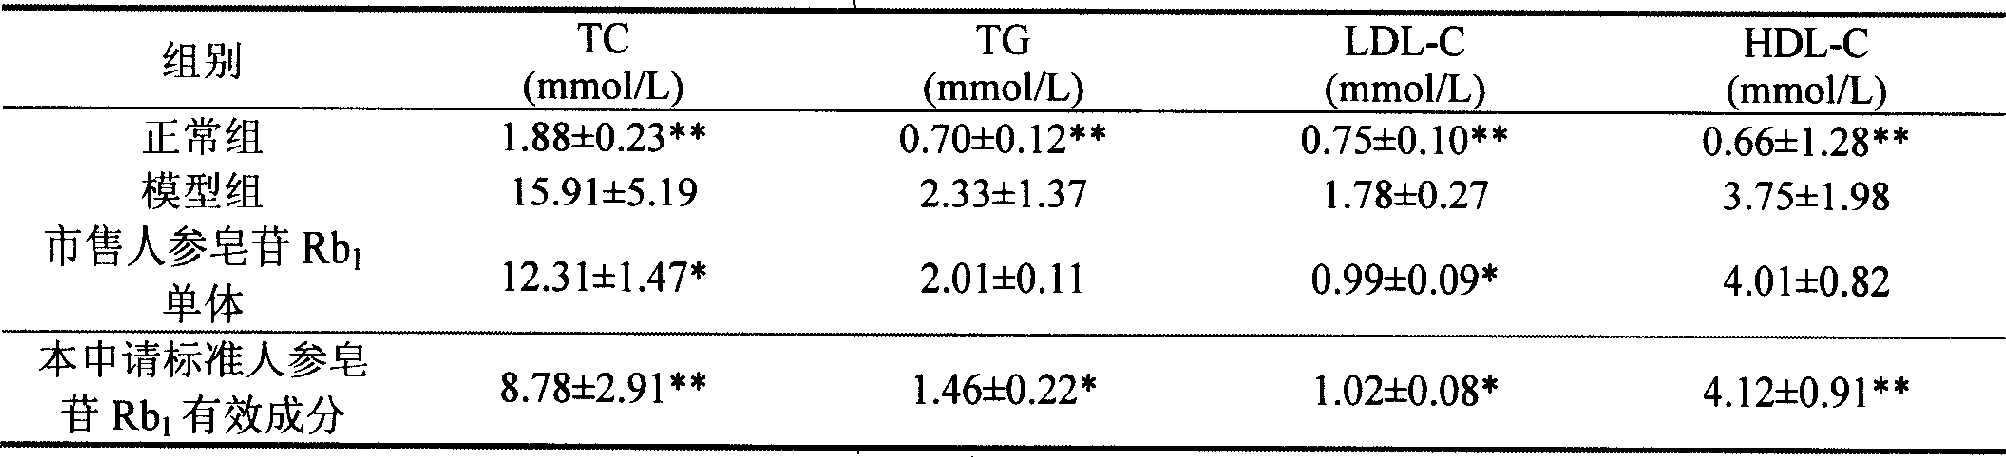 Ginsenoside Rb1 containing impurity ginsenoside Rc